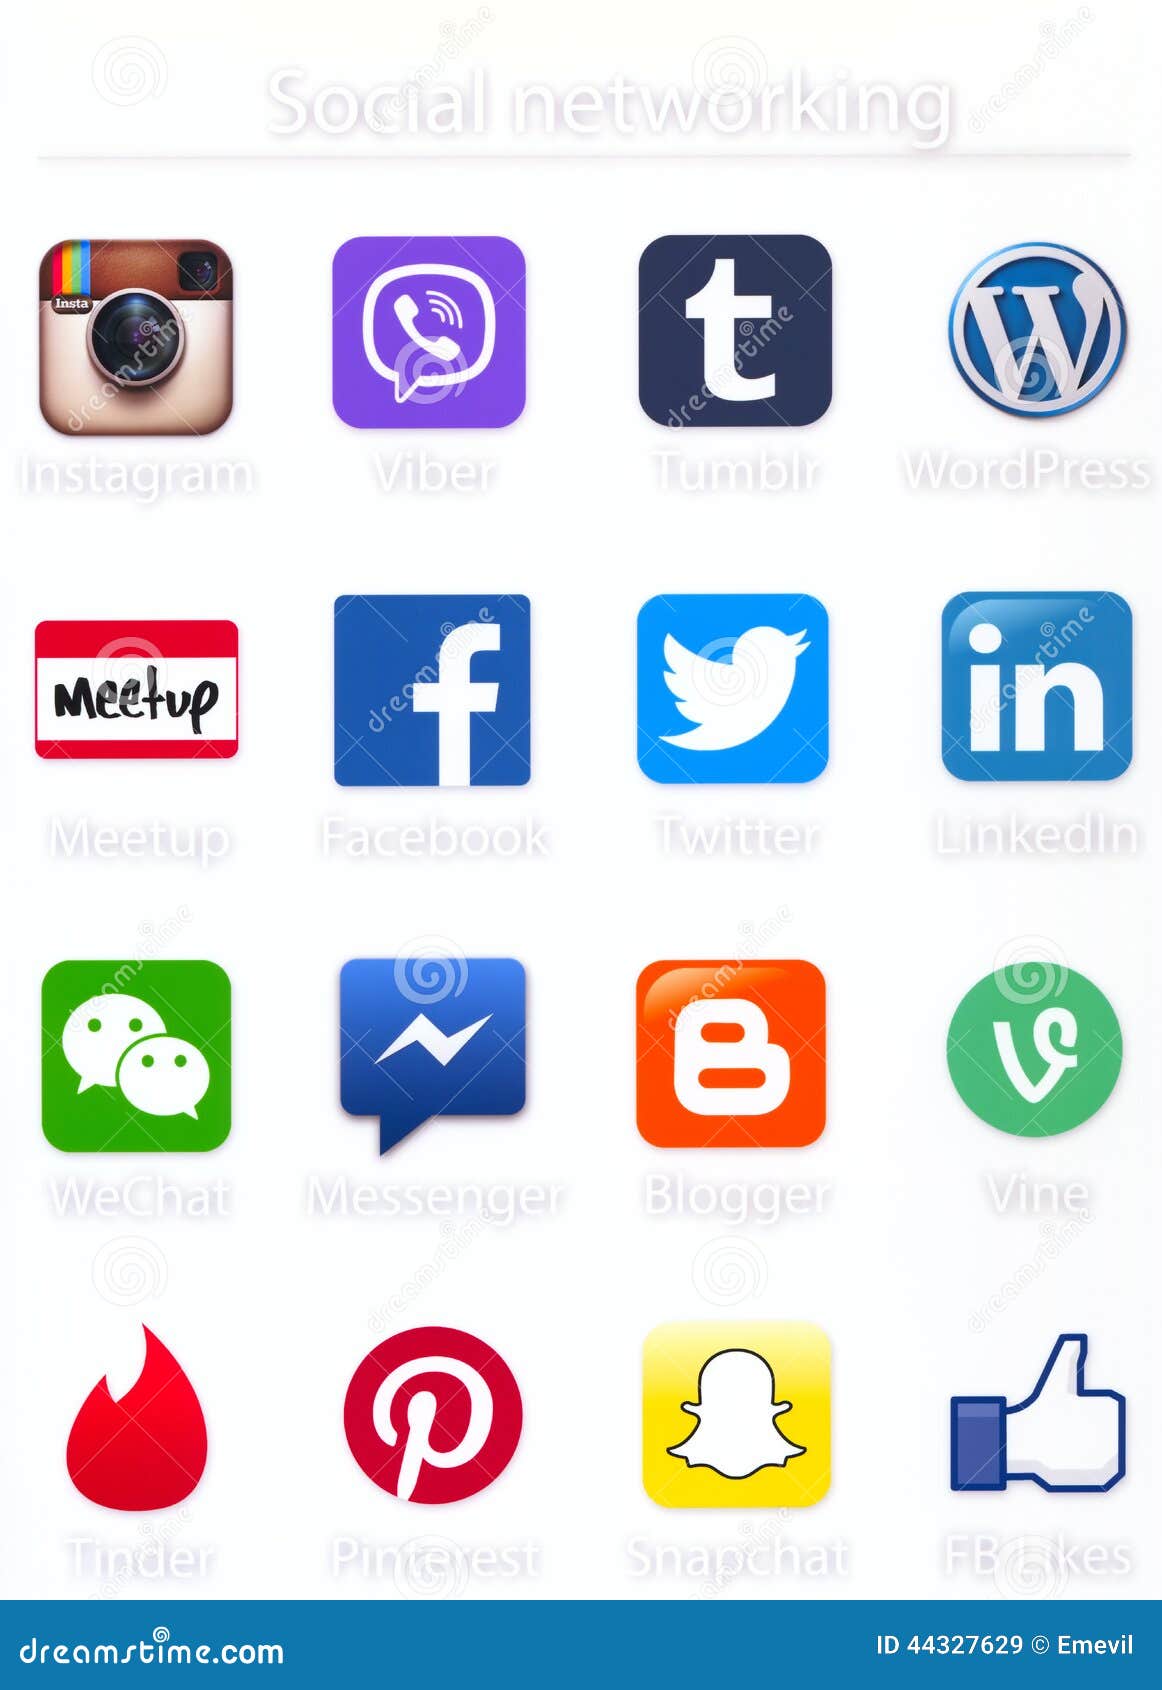 Networking apps social The Top